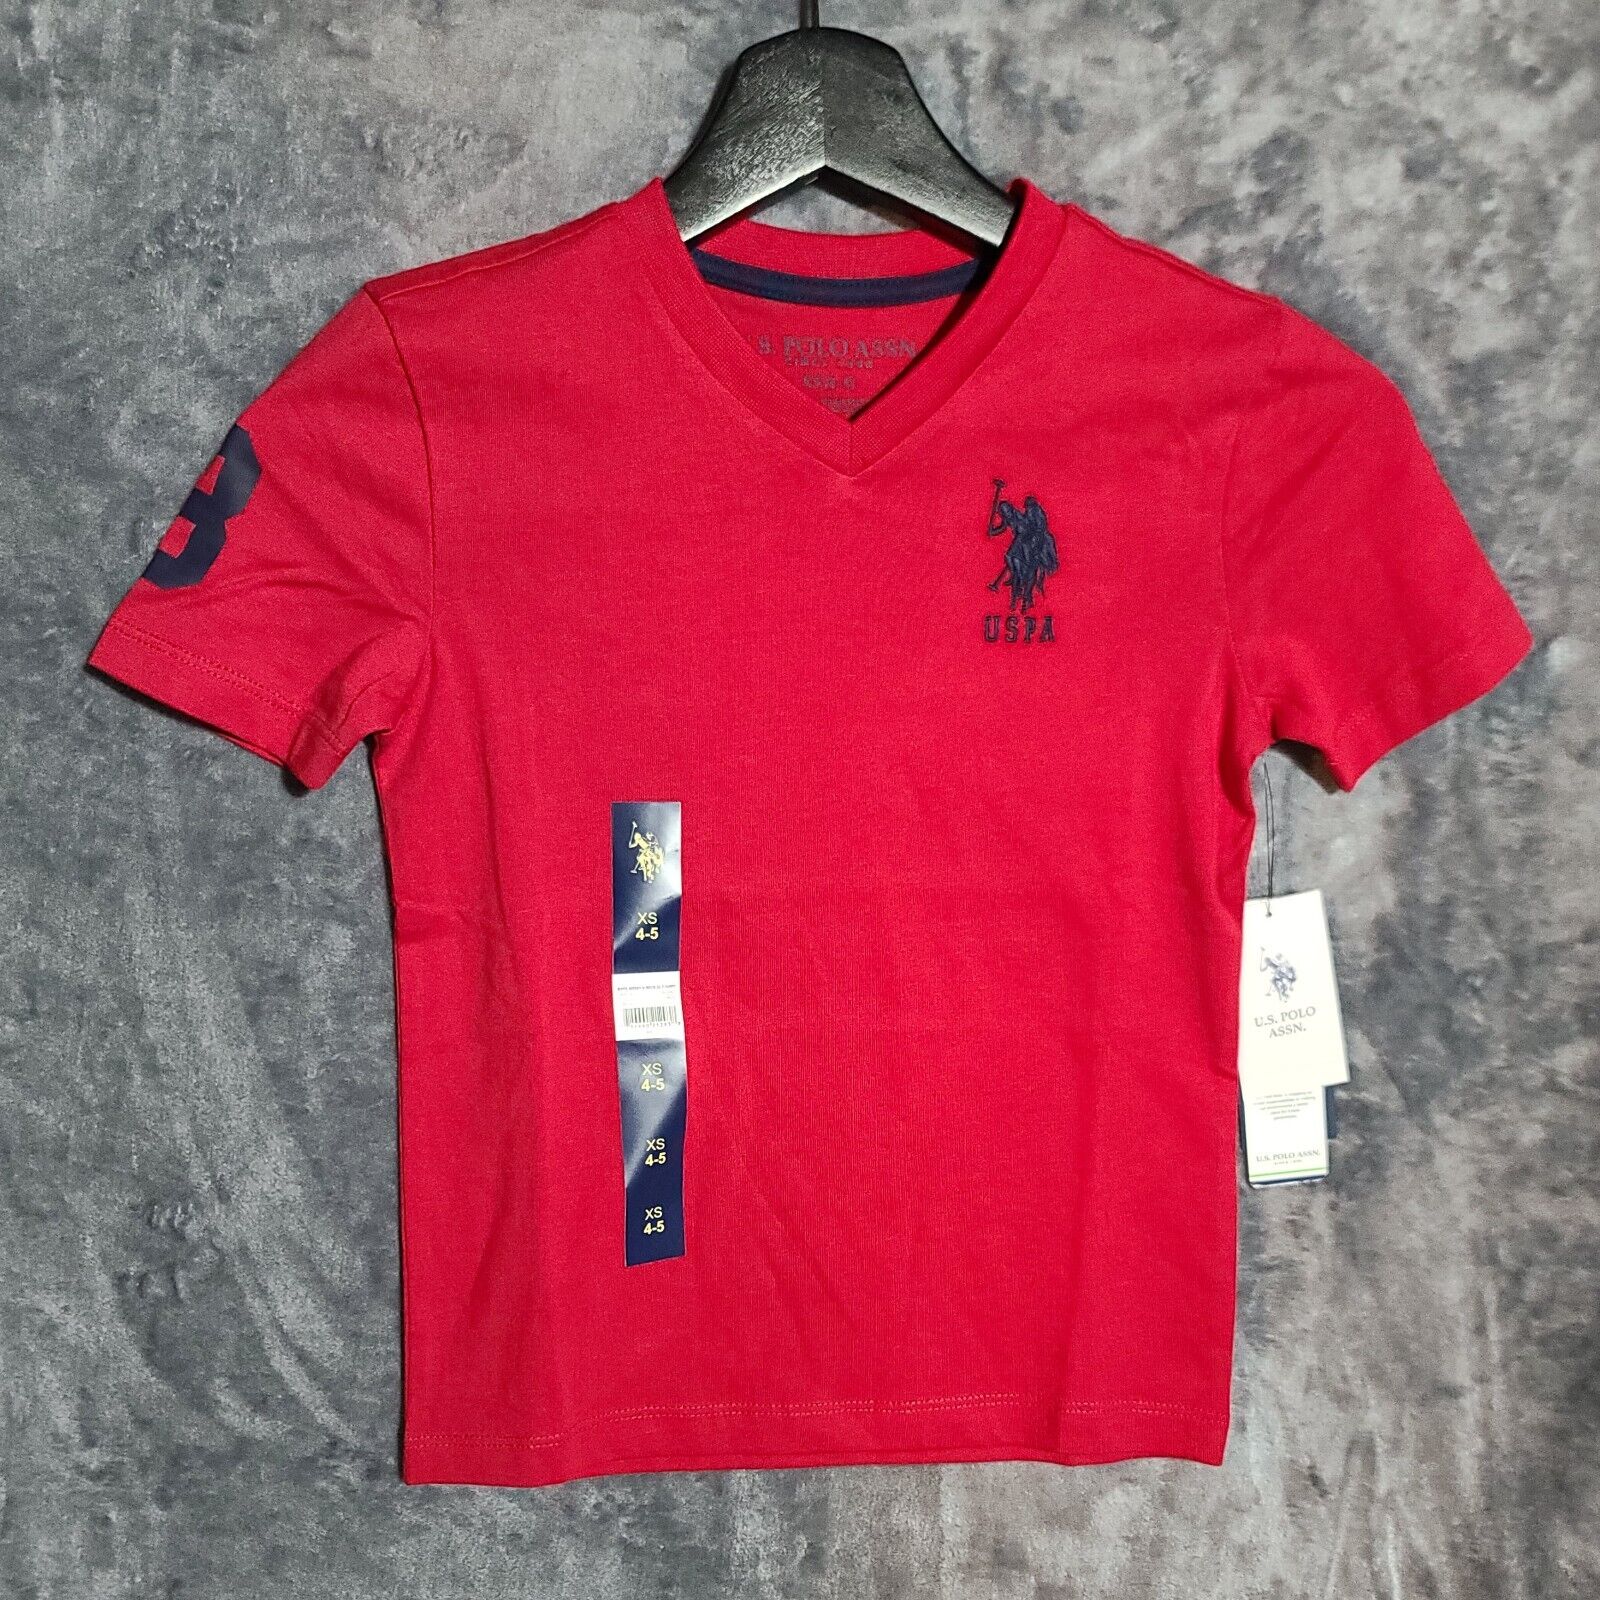 Latin Acquisition Whimsical Boys Us Polo Assn XS 4-5 Jersey Short Sleeve T Shirt Red | eBay